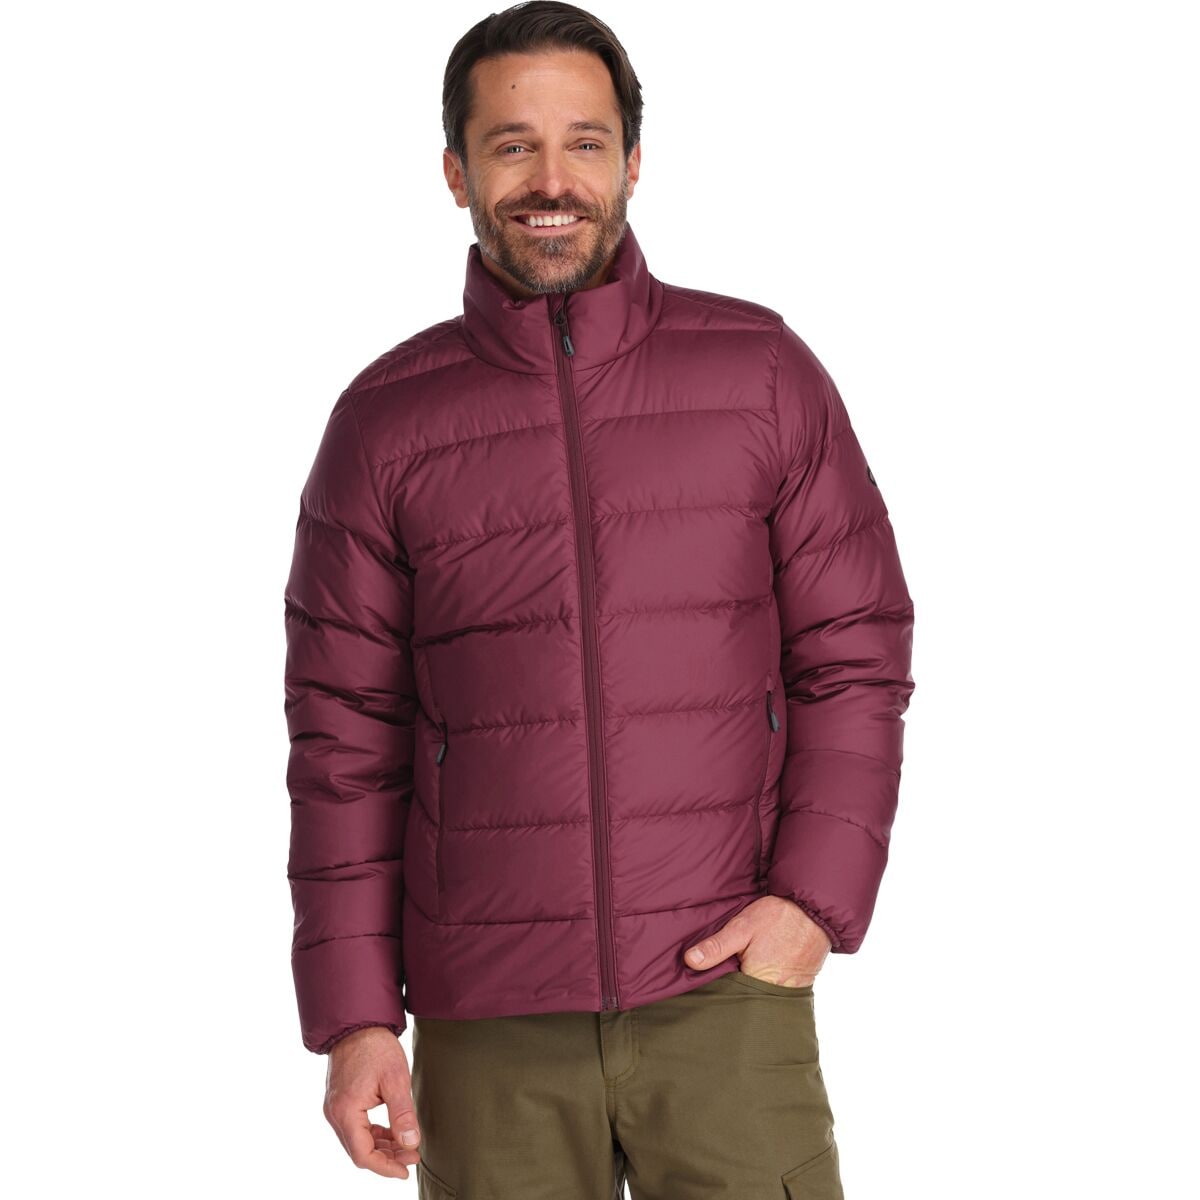 Outdoor Research Coldfront Down Jacket - Men's